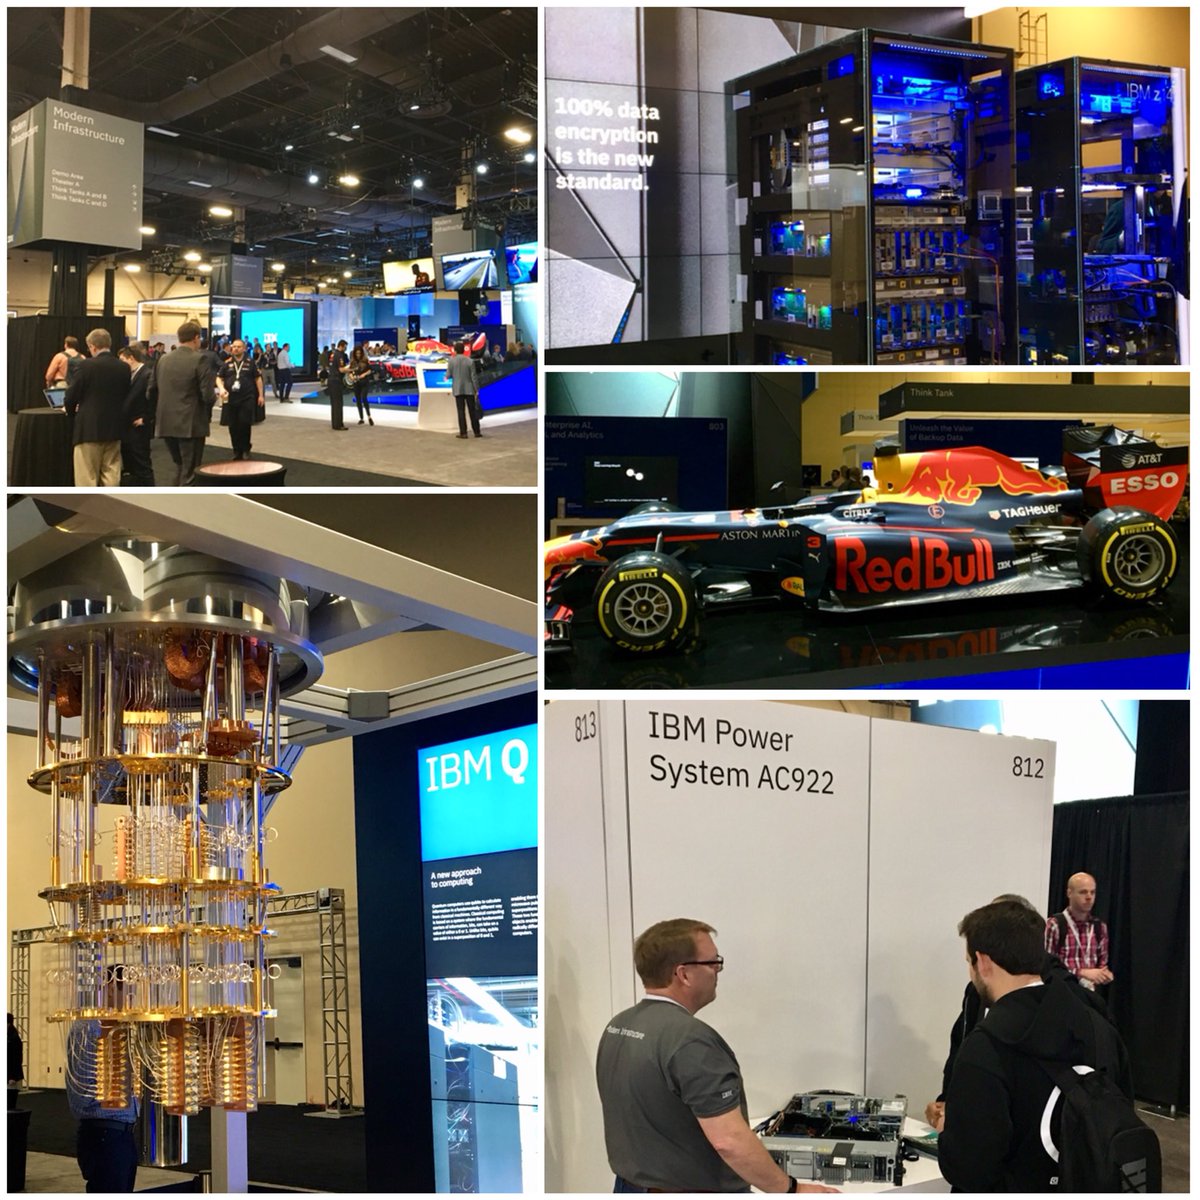 Photos can’t do justice to the size, scale and #innovation @IBM #Think2018 Think Campus, but I’m going to try anyway. So much to see, do and learn! #ModernInfrastructure #IBM #putsmarttowork #PowerSystems #ibmz #ibmstorage #IBMQ